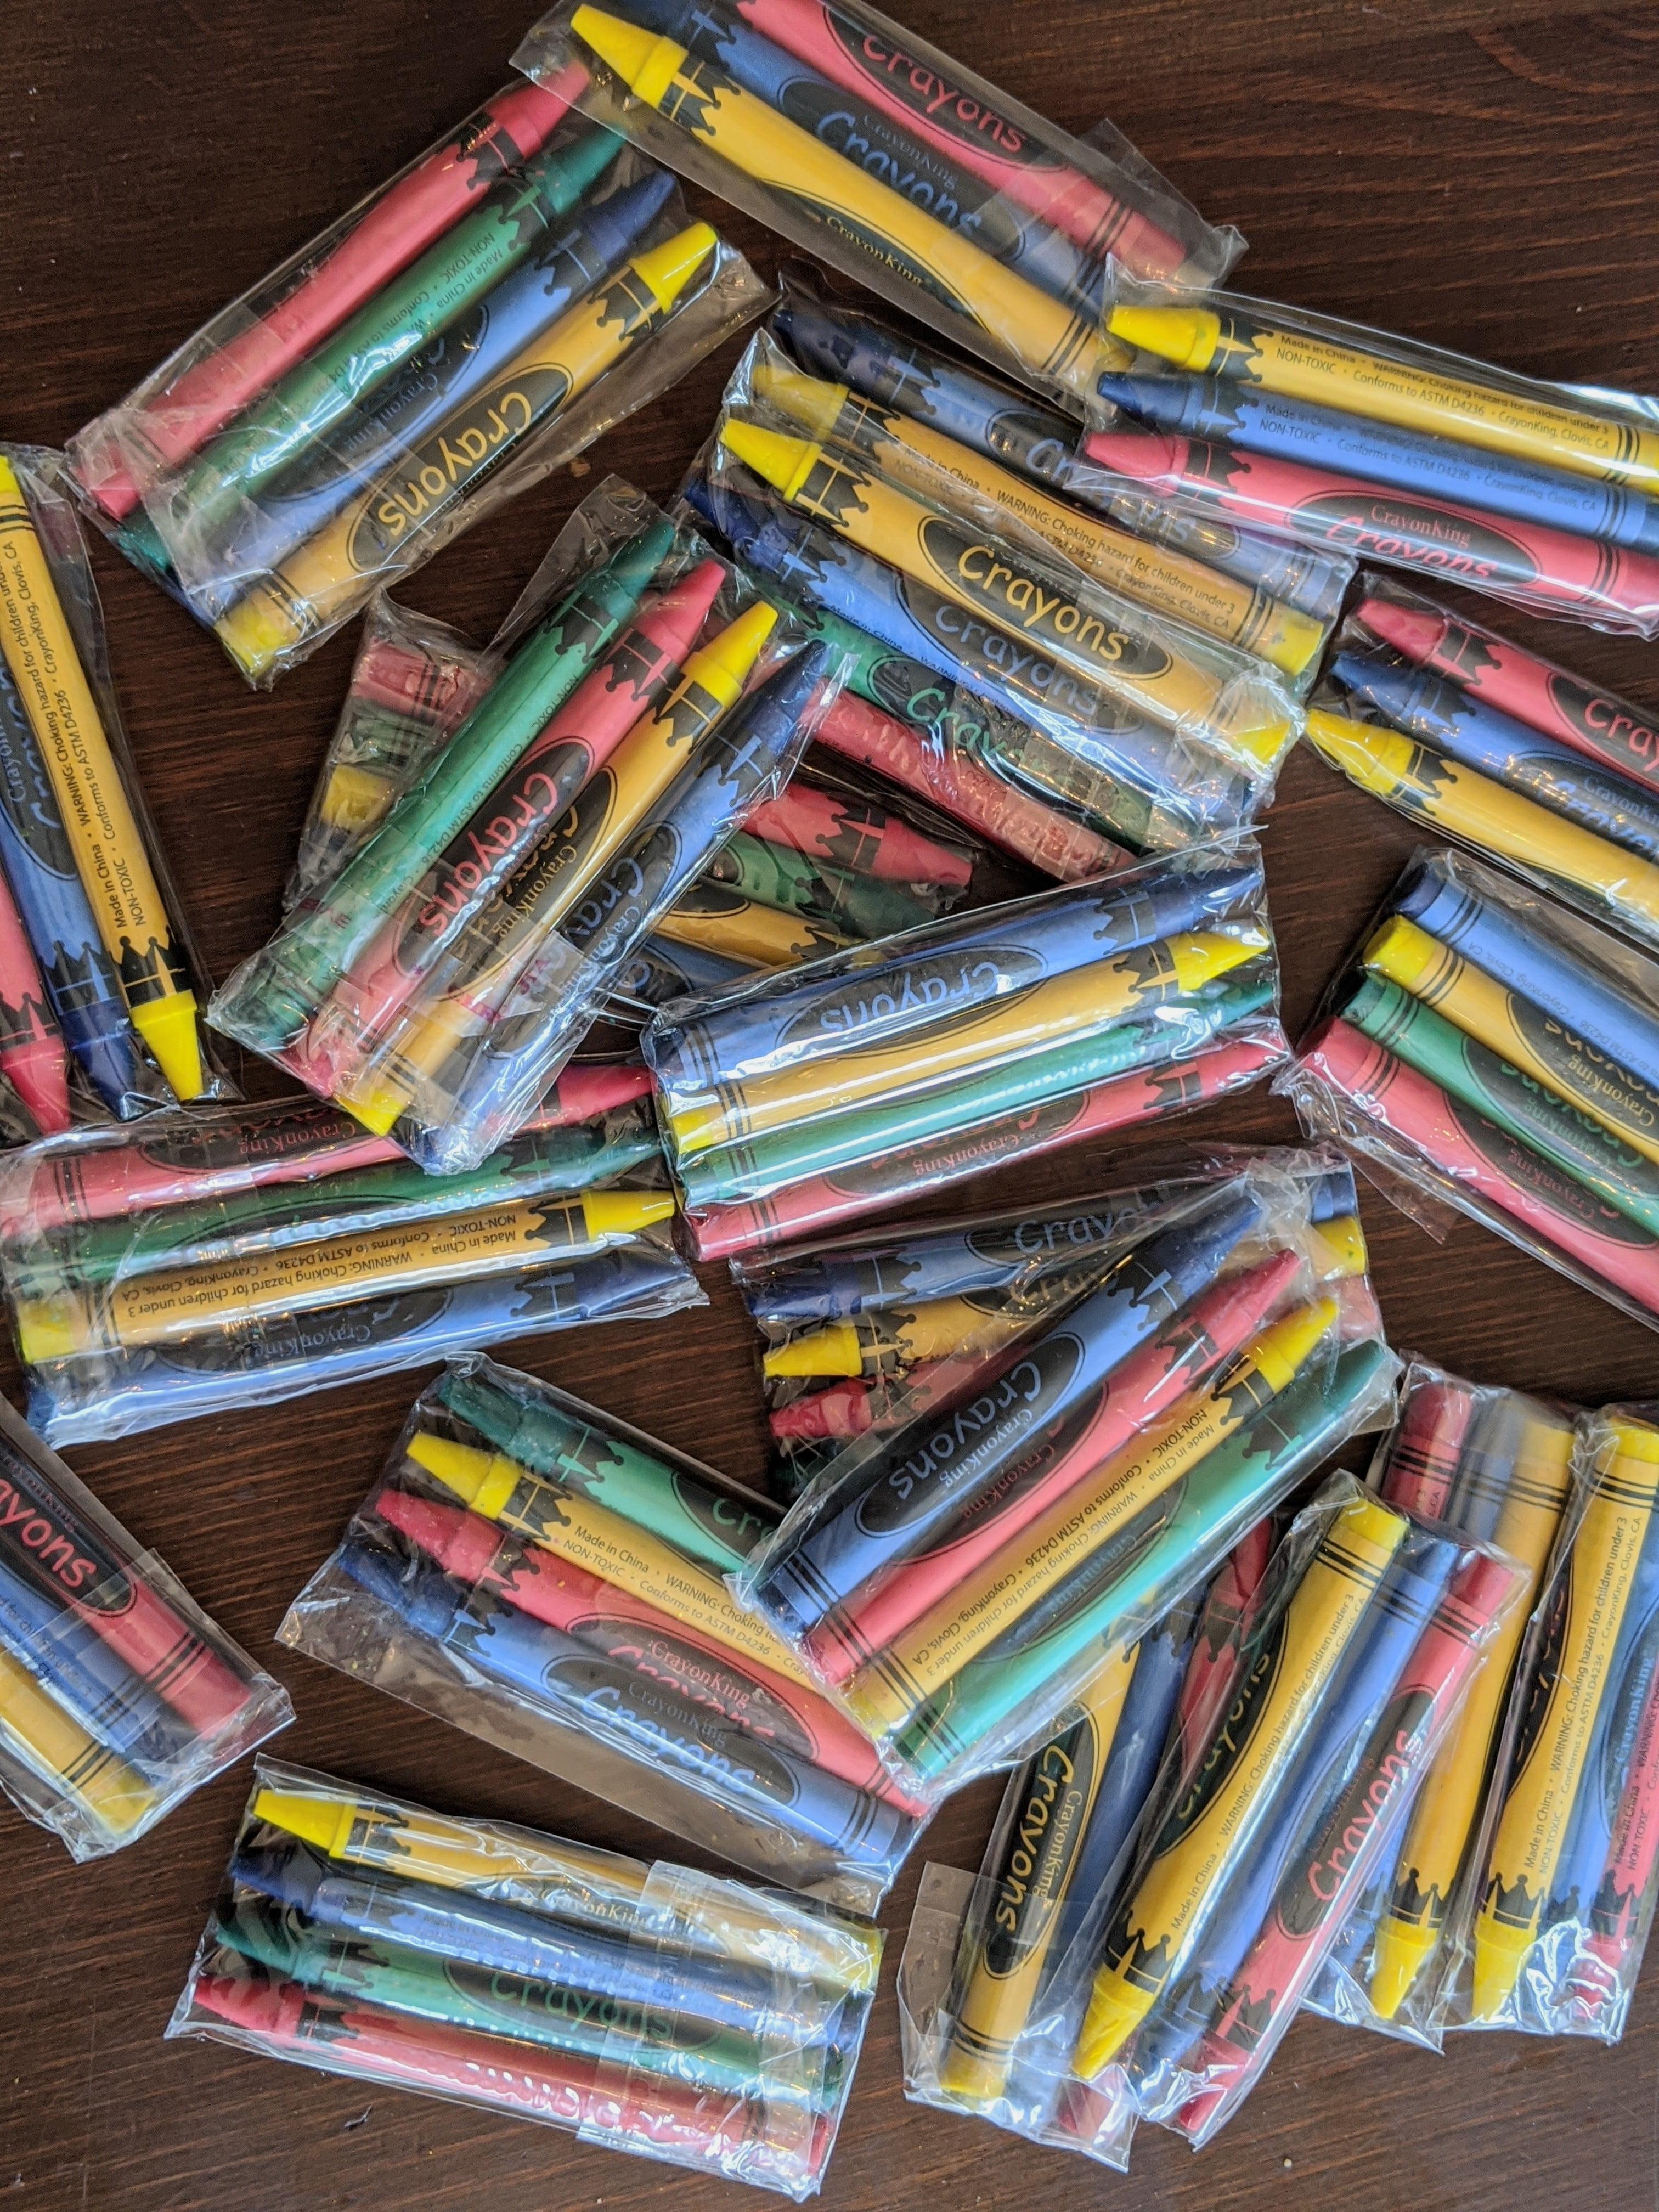 CrayonKing 500 4-Packs of Crayons in A Box